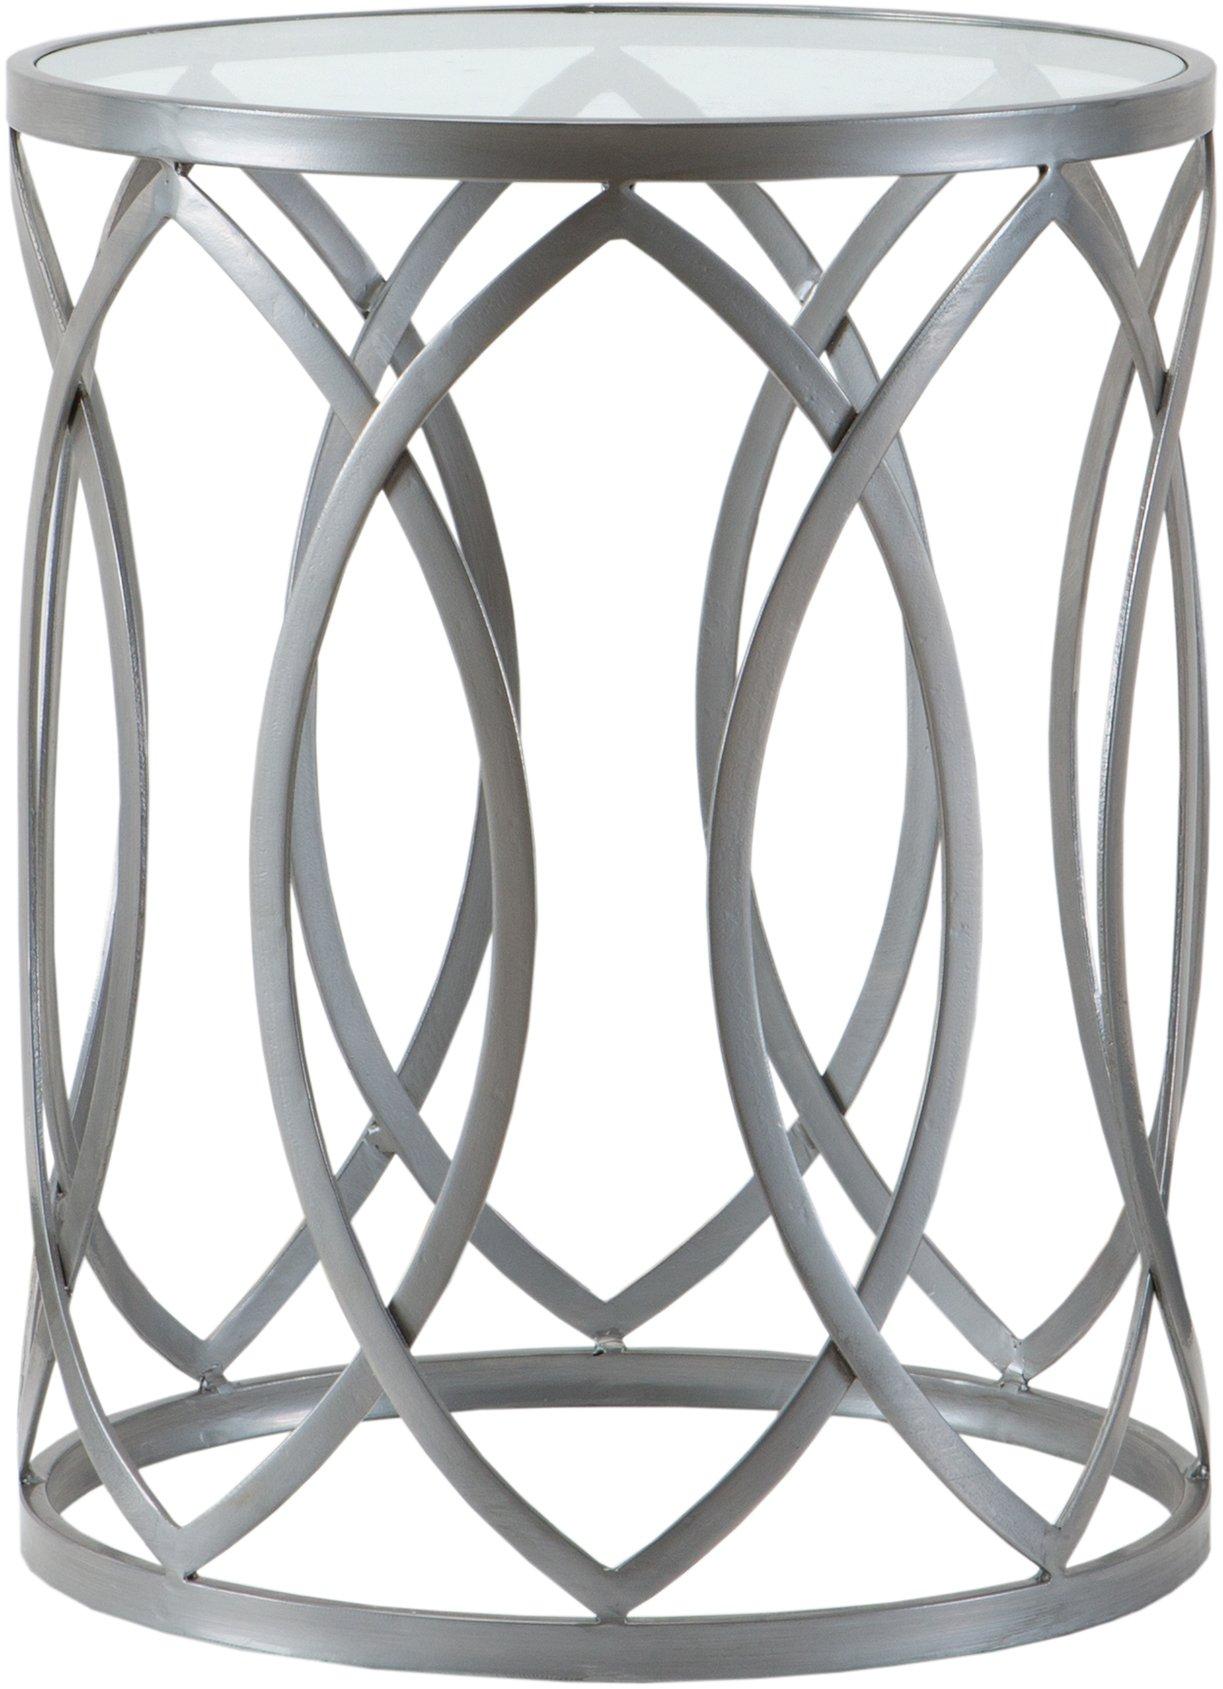 Madison Park Gaige Silver Metal Eyelet Accent Table - 16x20